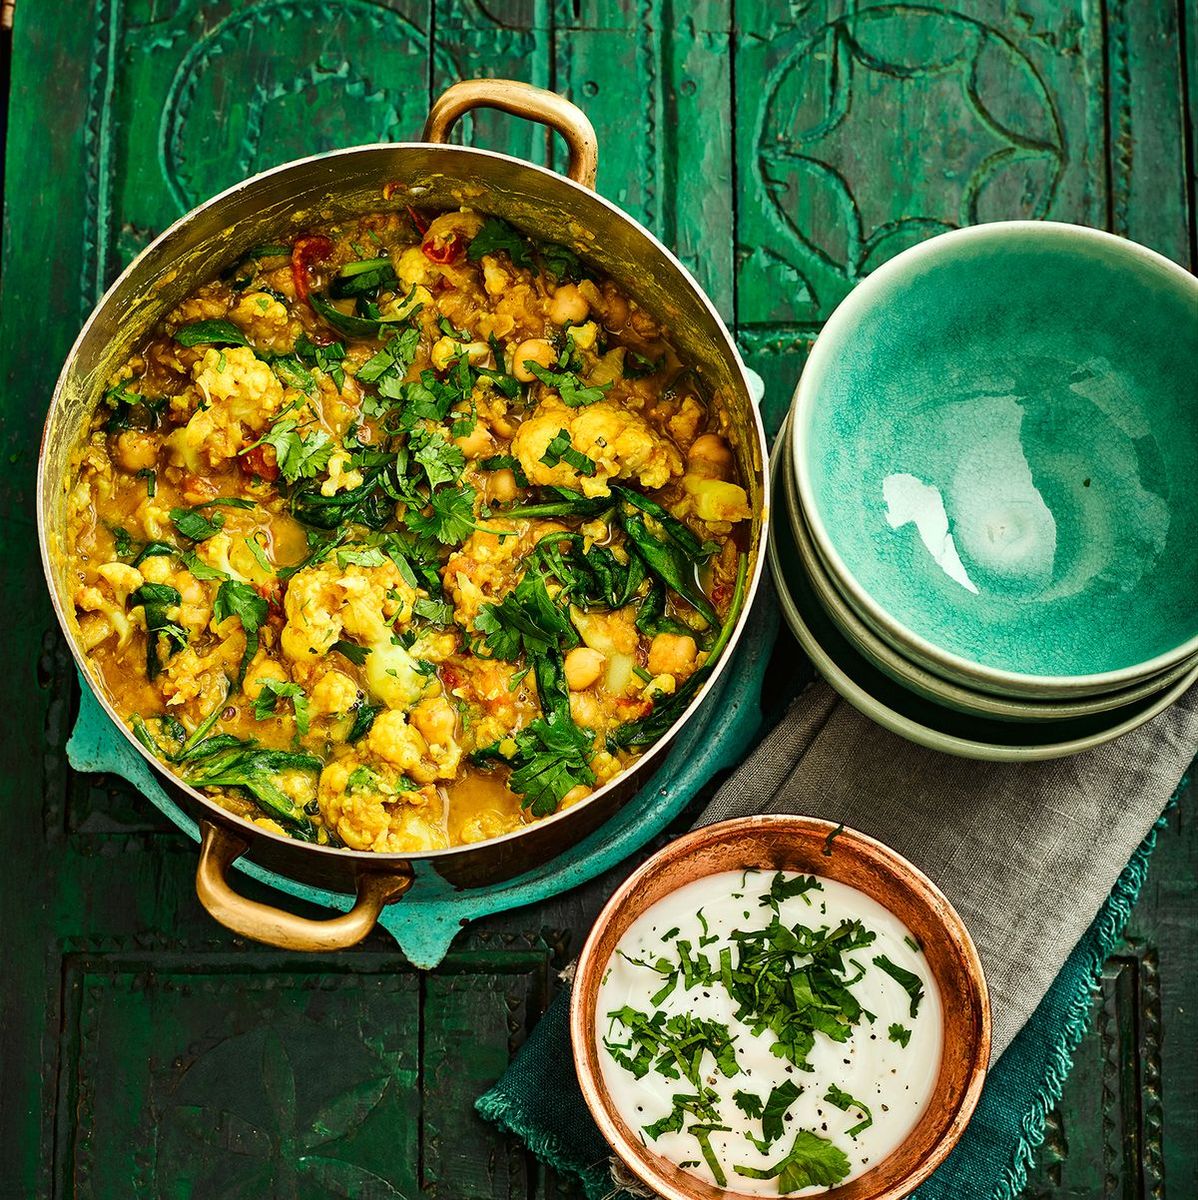 These are our tastiest chickpea curry recipes to try now